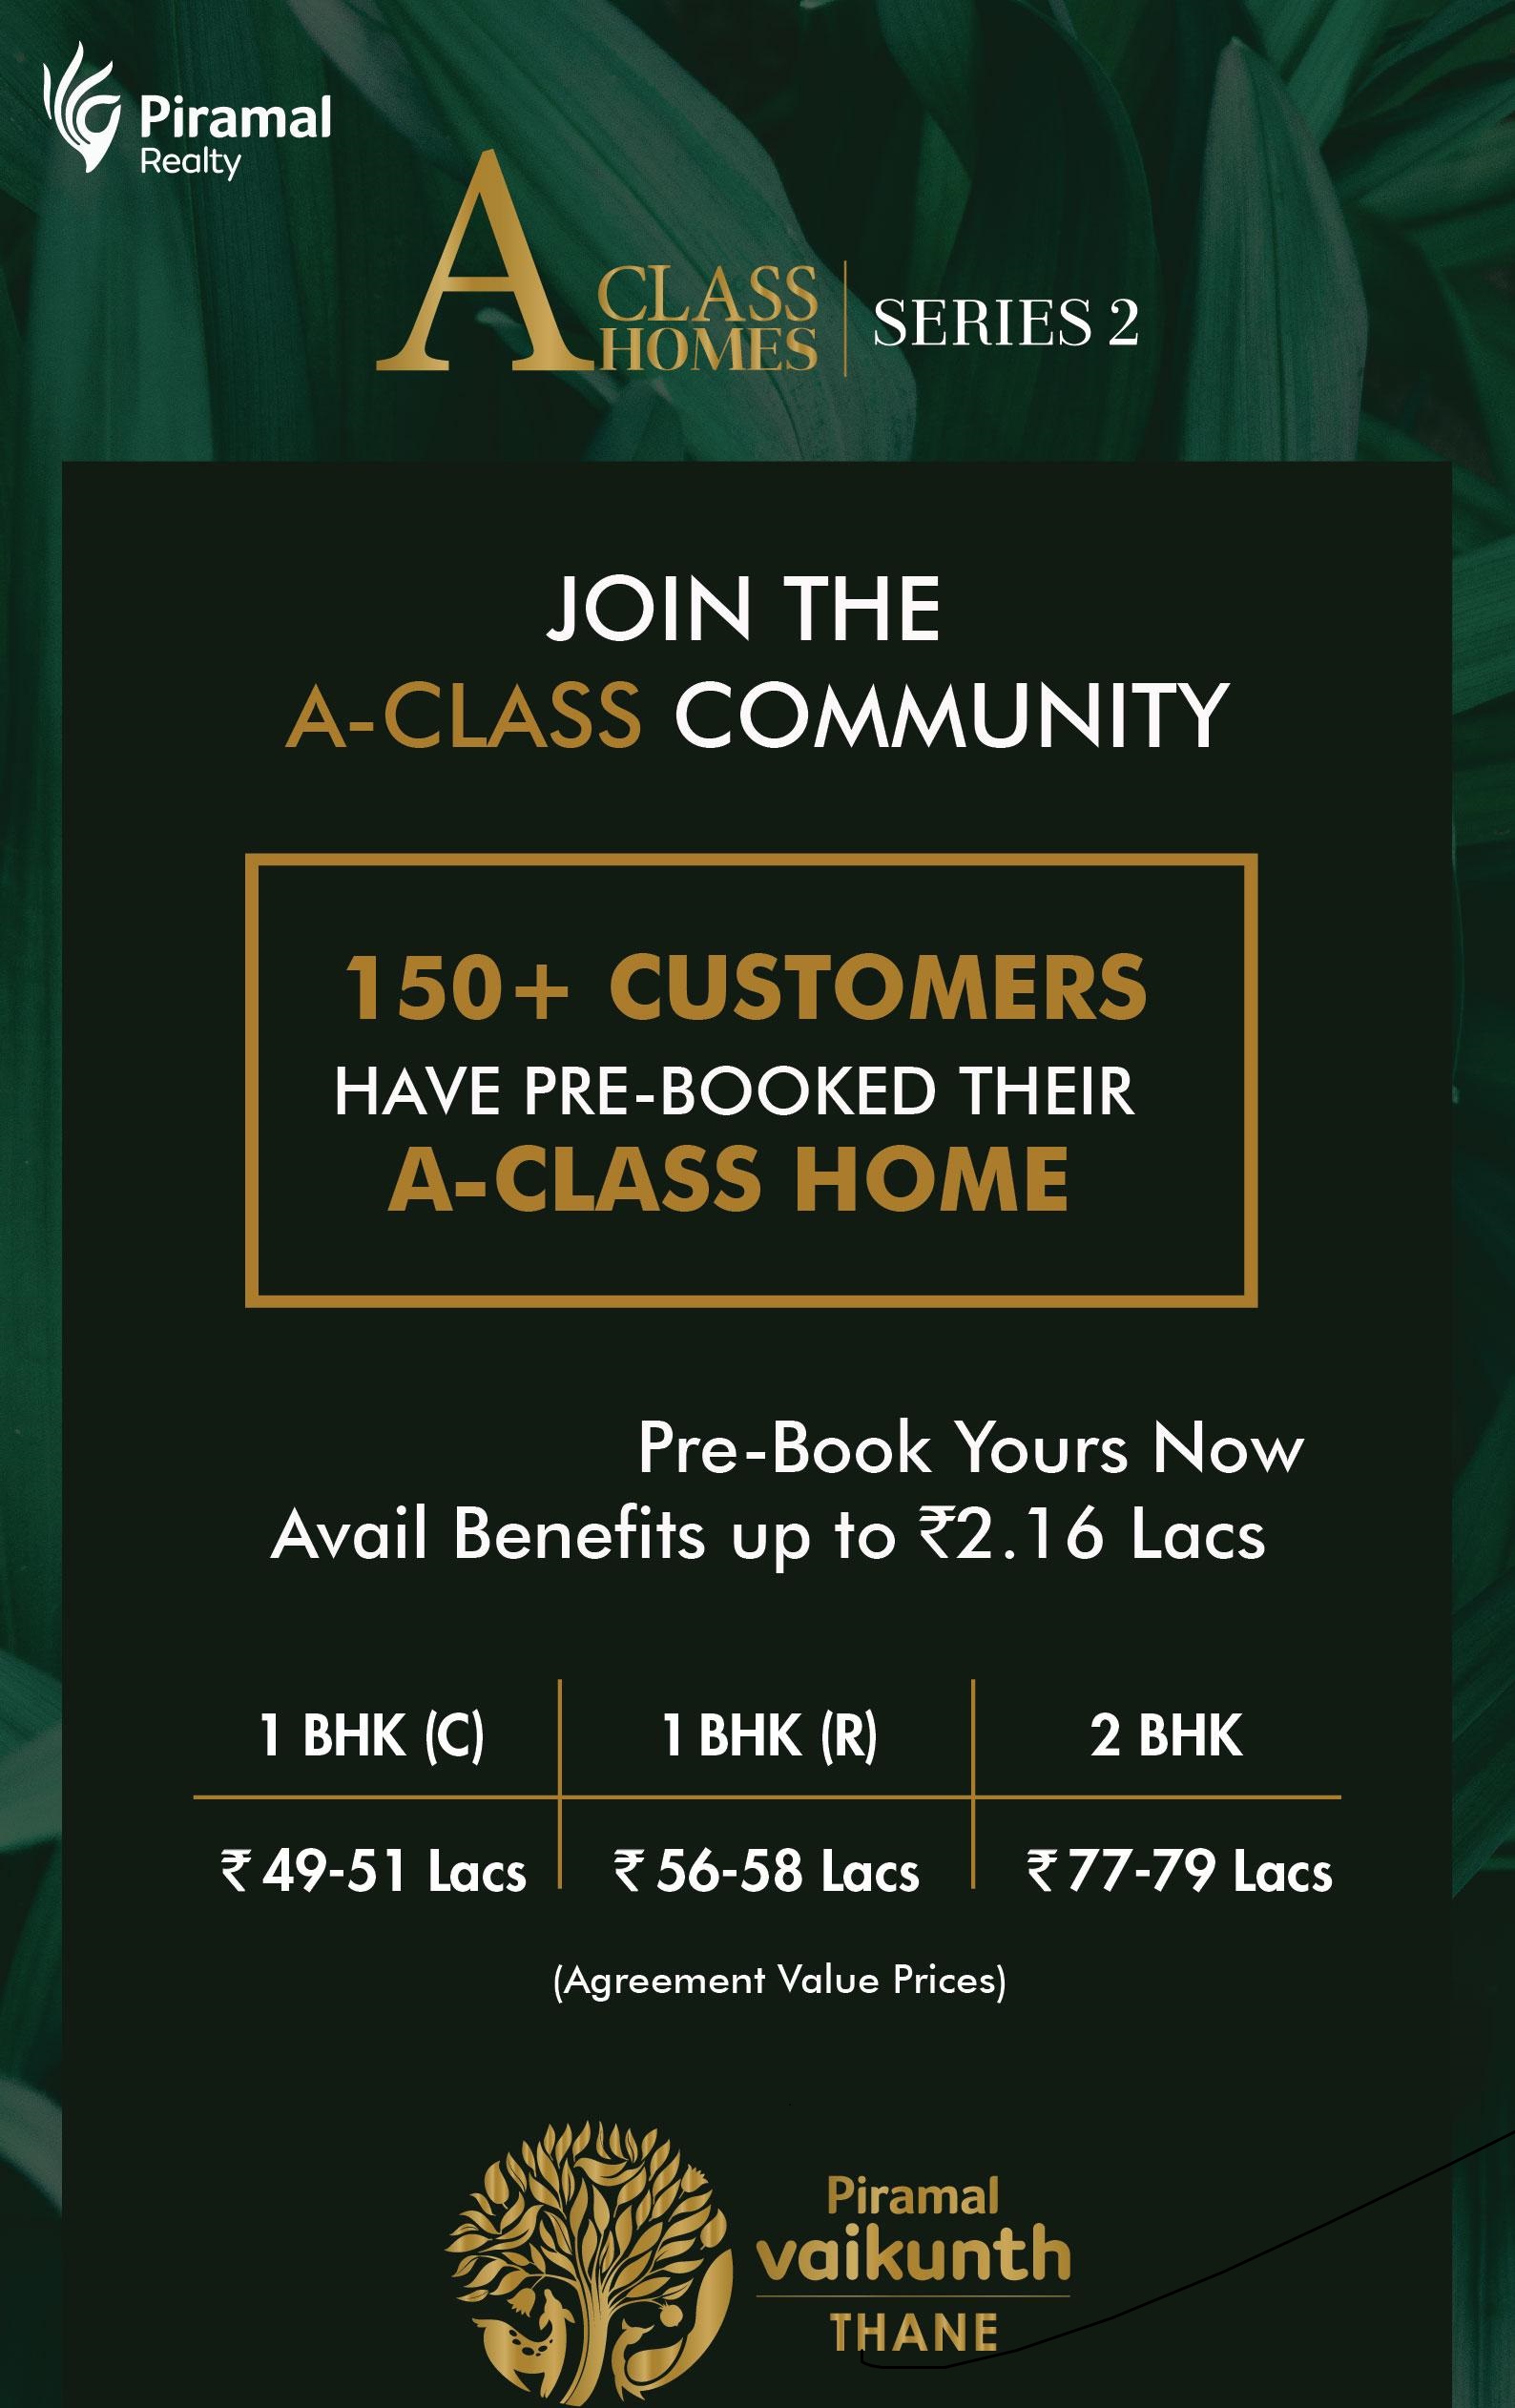 Pre-book now and avail benefits up to Rs 2.16 Lakh at  Piramal Vaikunth A Class Homes Update